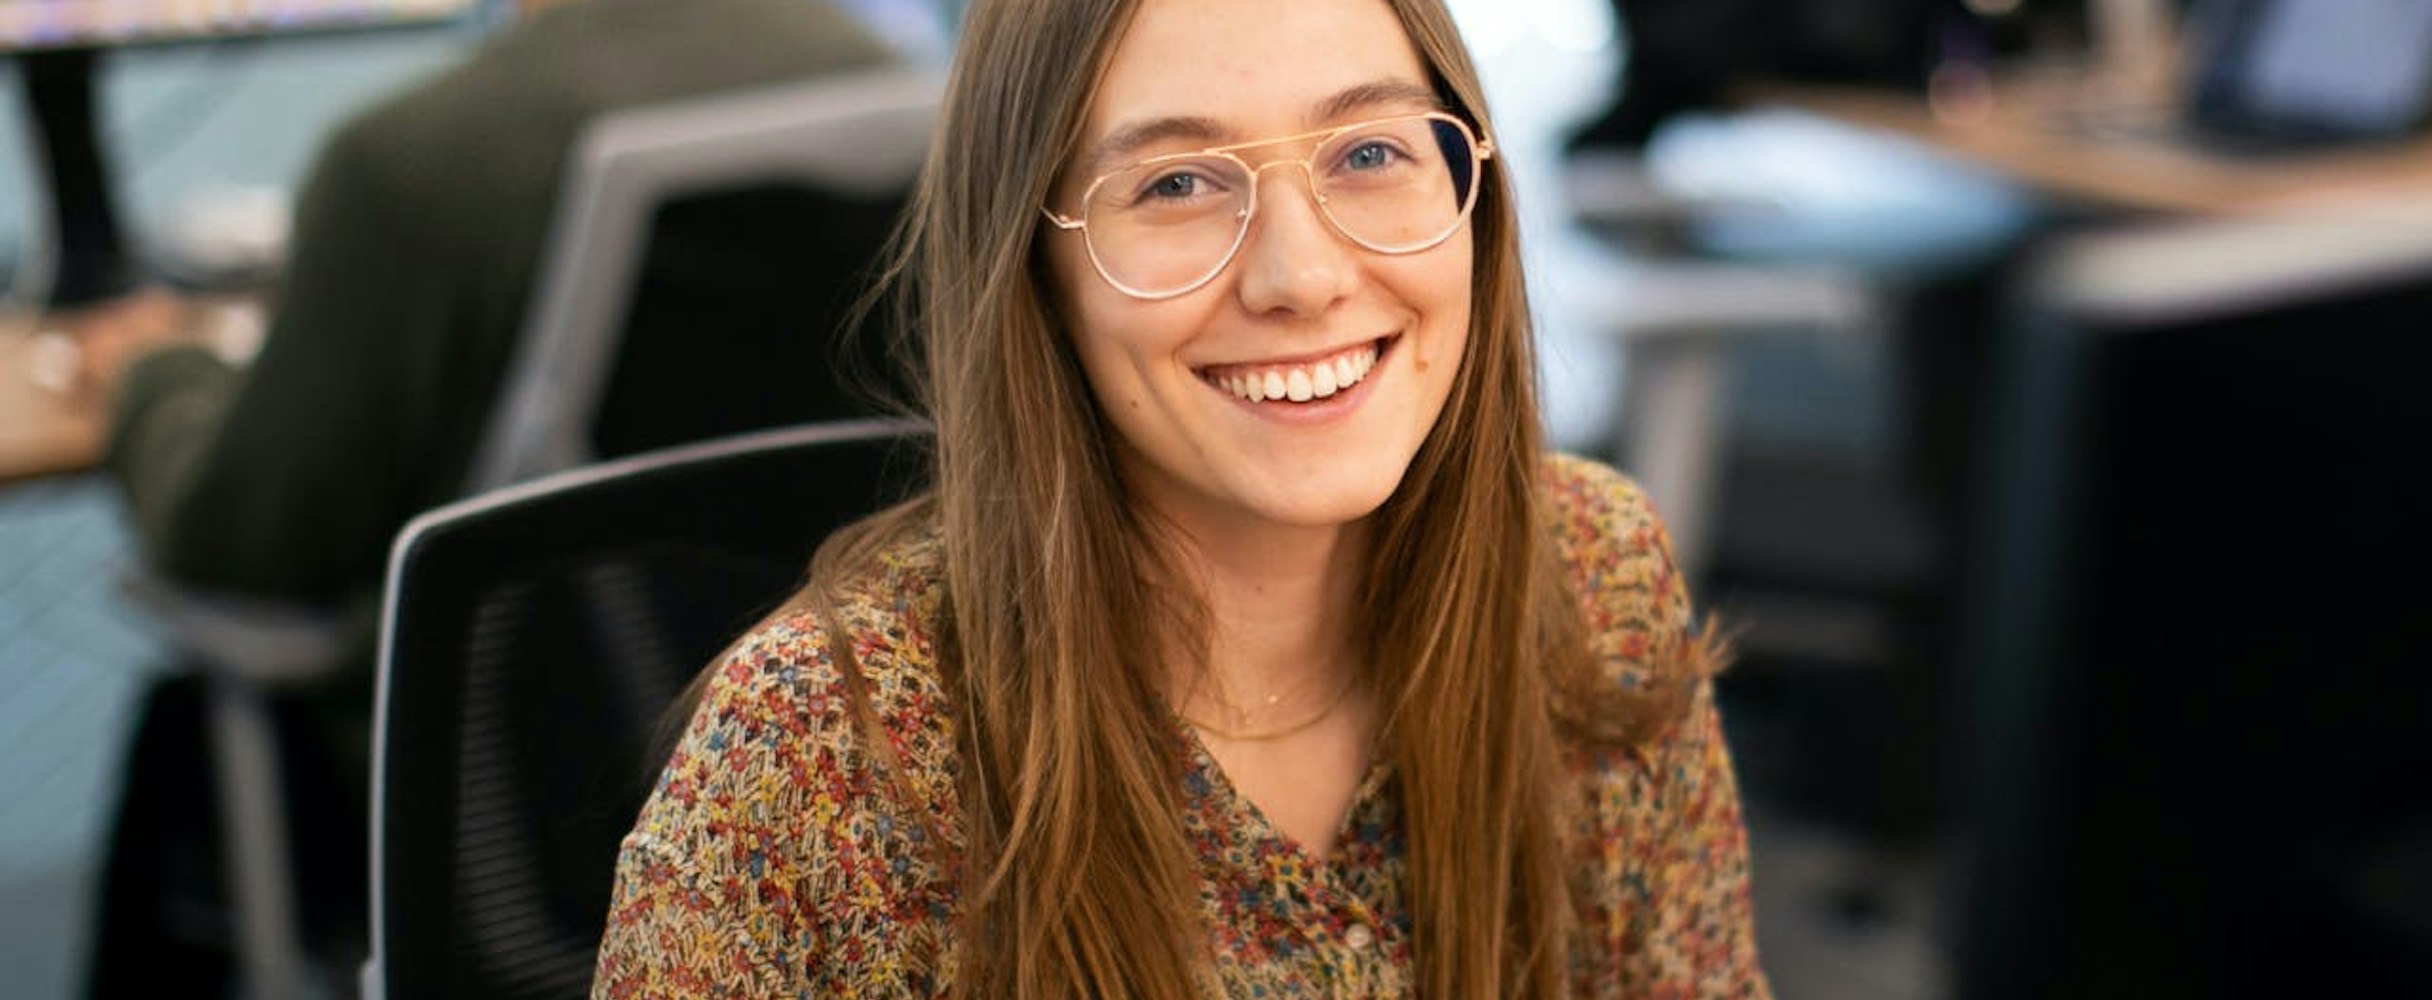 Meet the Narrative team: 
Head of Growth, Chelsea Andrews